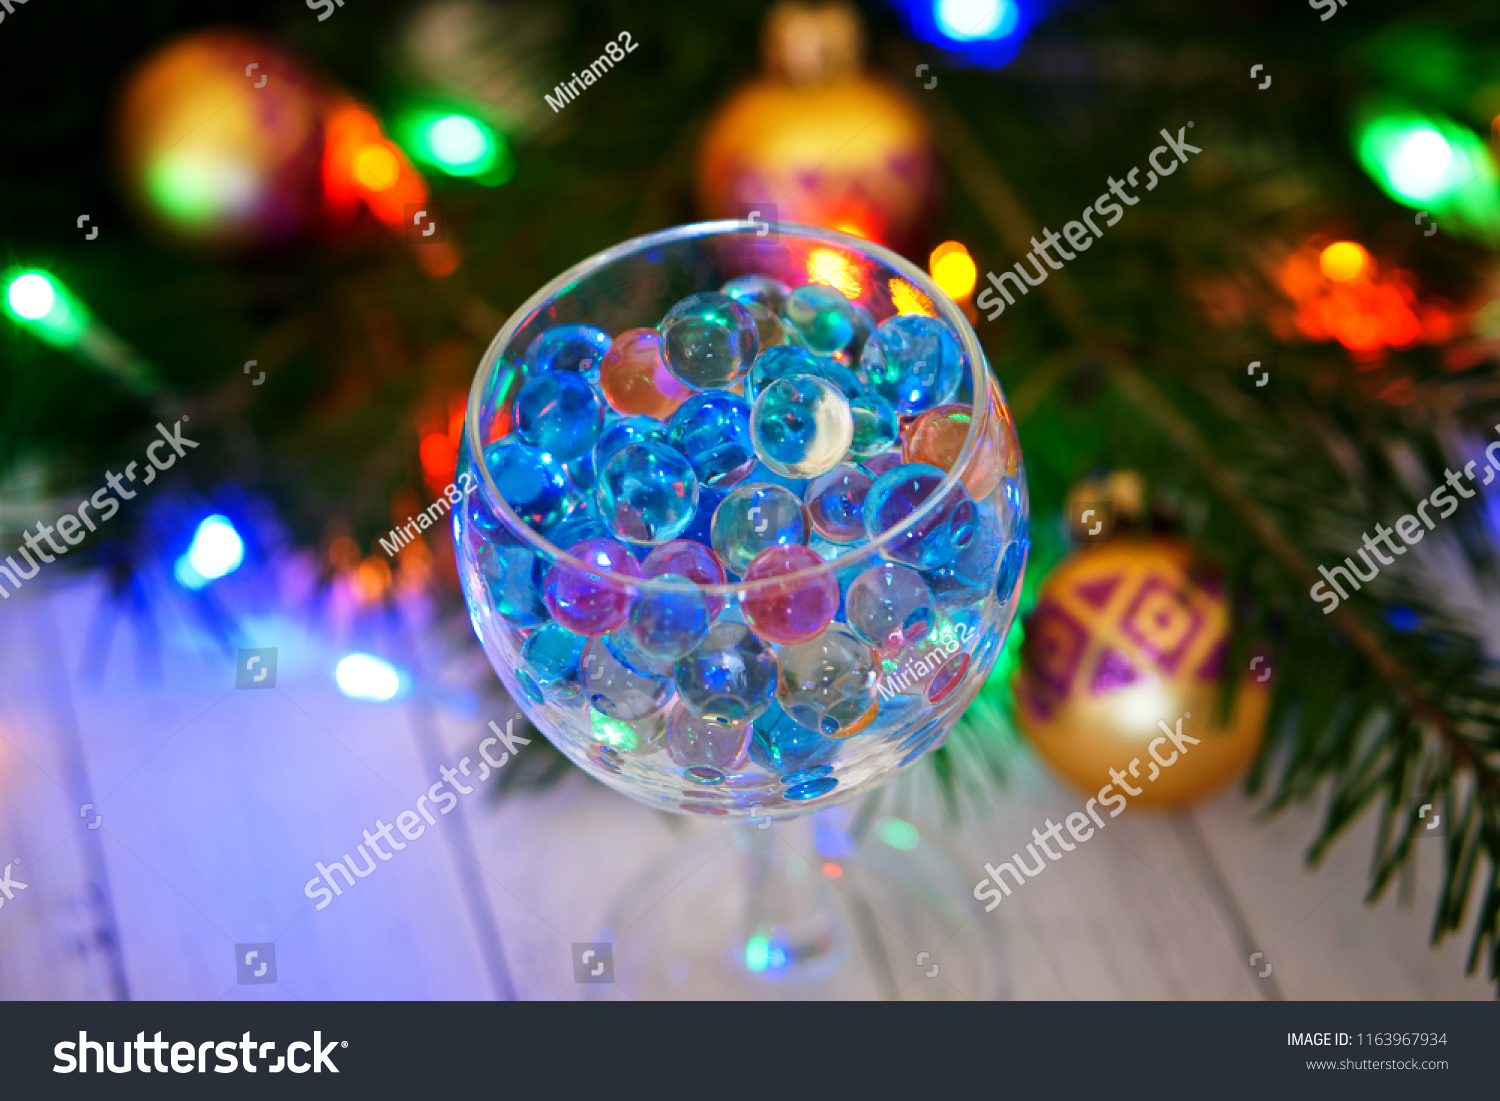 Transparent glass with gel balls on the background of a Christmas tree. An unusual drink.                                #1163967934